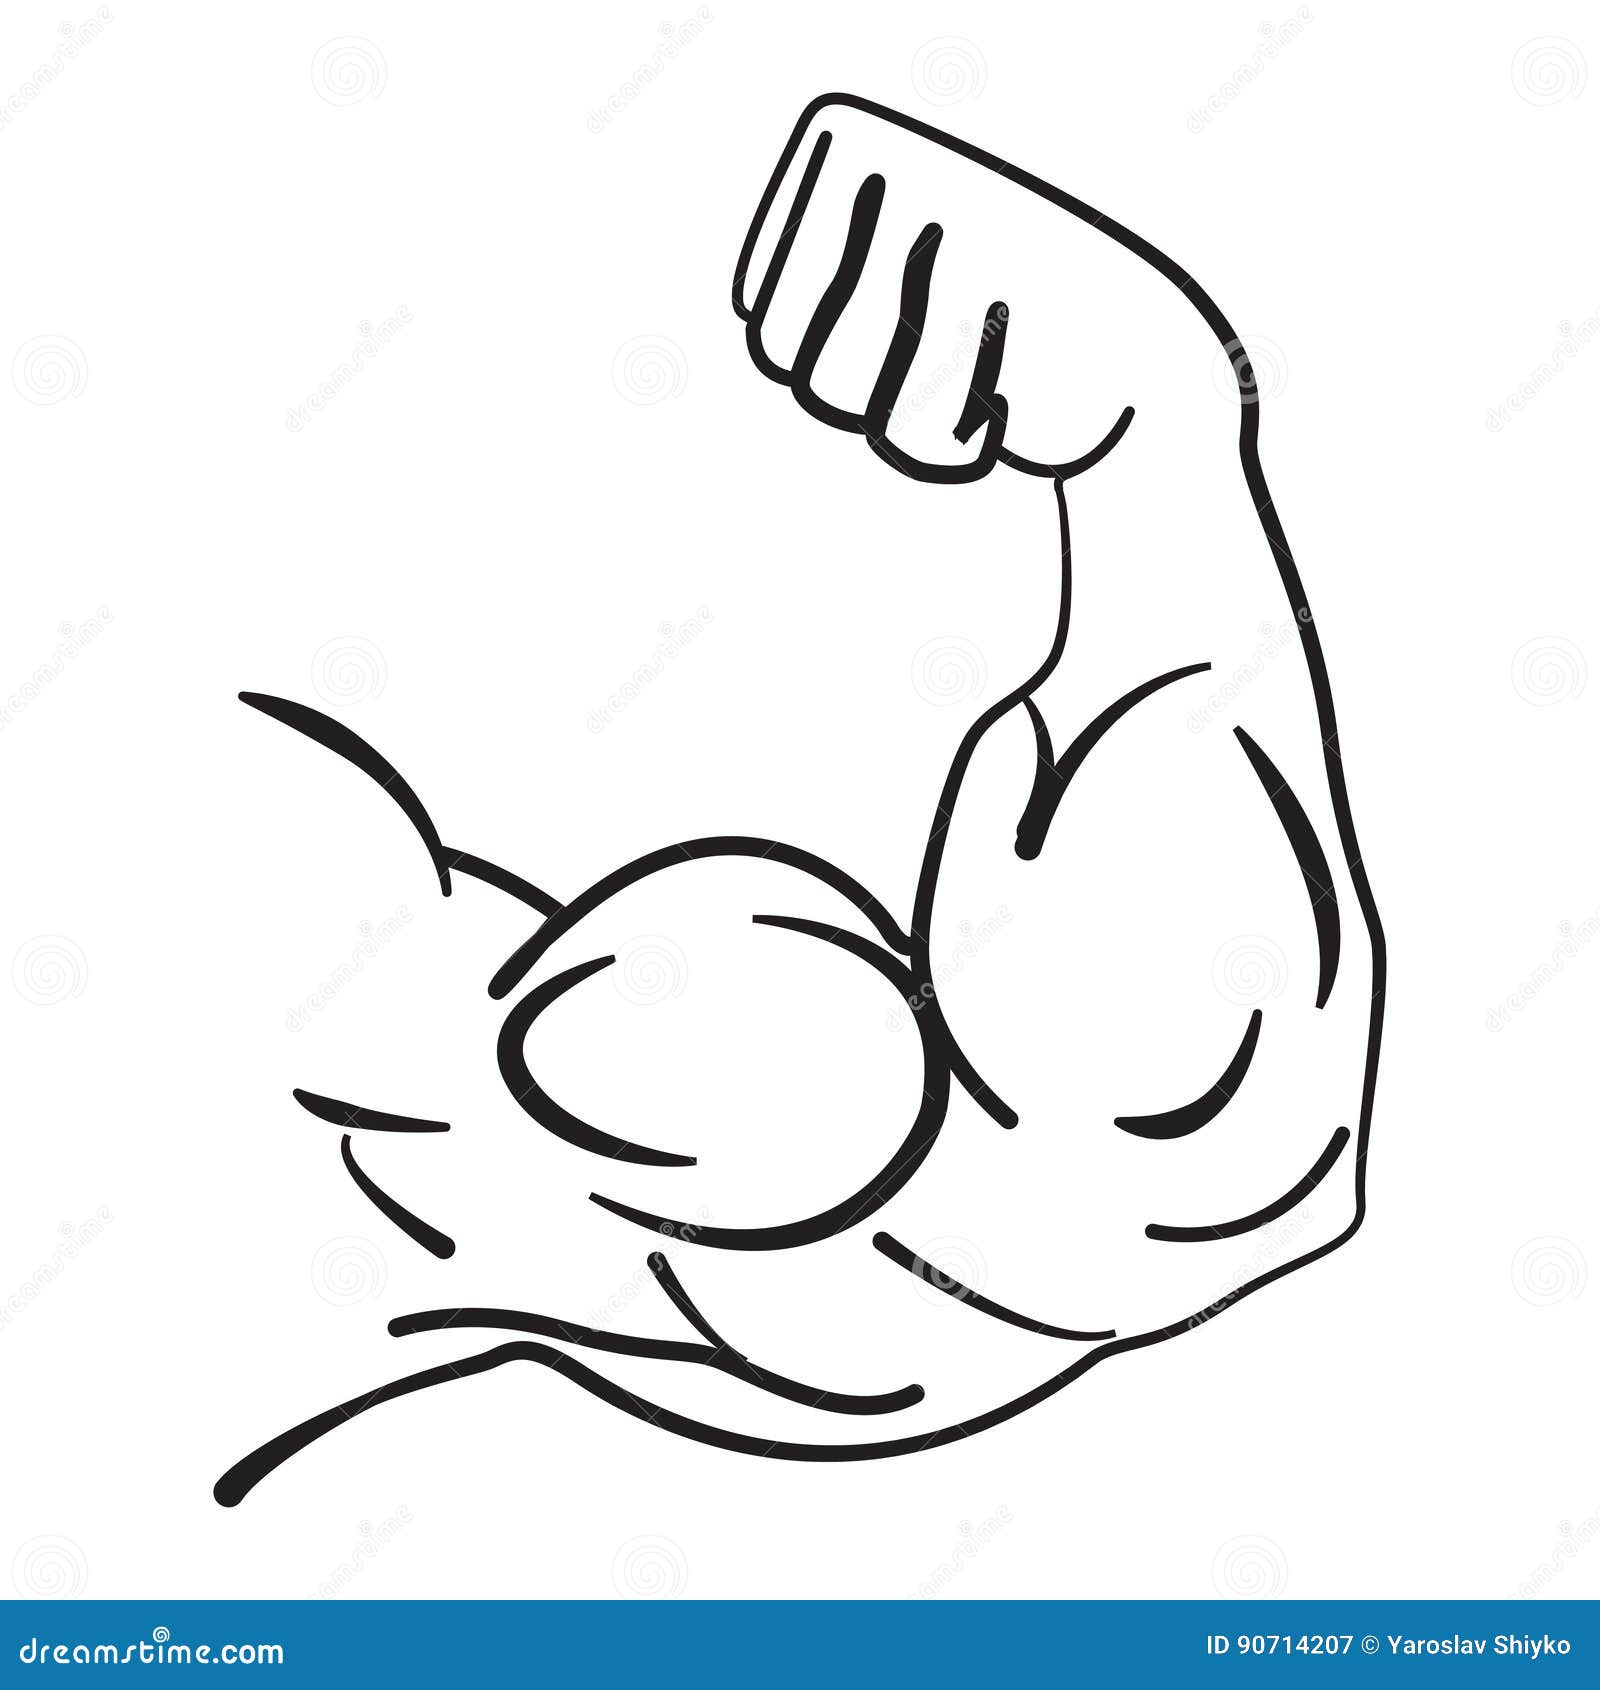 https://thumbs.dreamstime.com/z/strong-power-muscle-arms-vector-icon-white-background-90714207.jpg